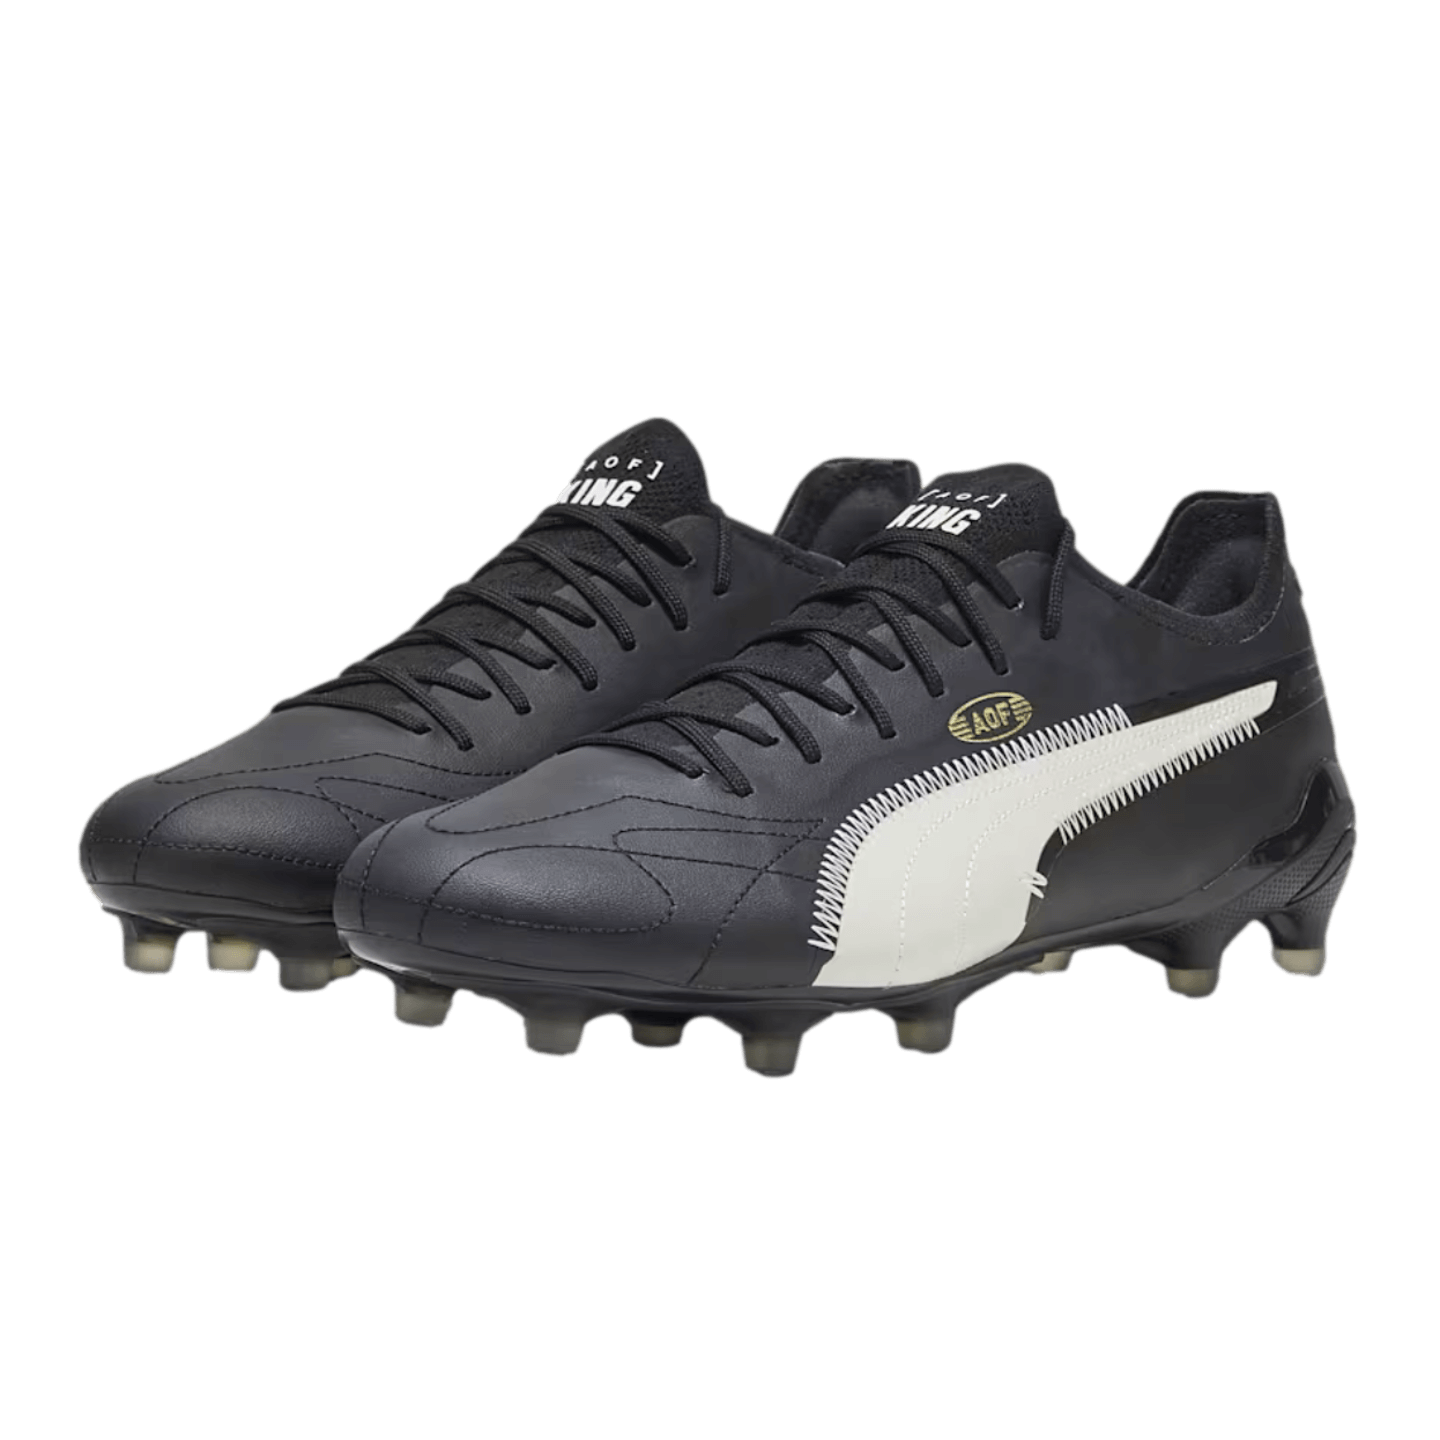 Puma King Ultimate "Art of Football" Firm Ground Cleats